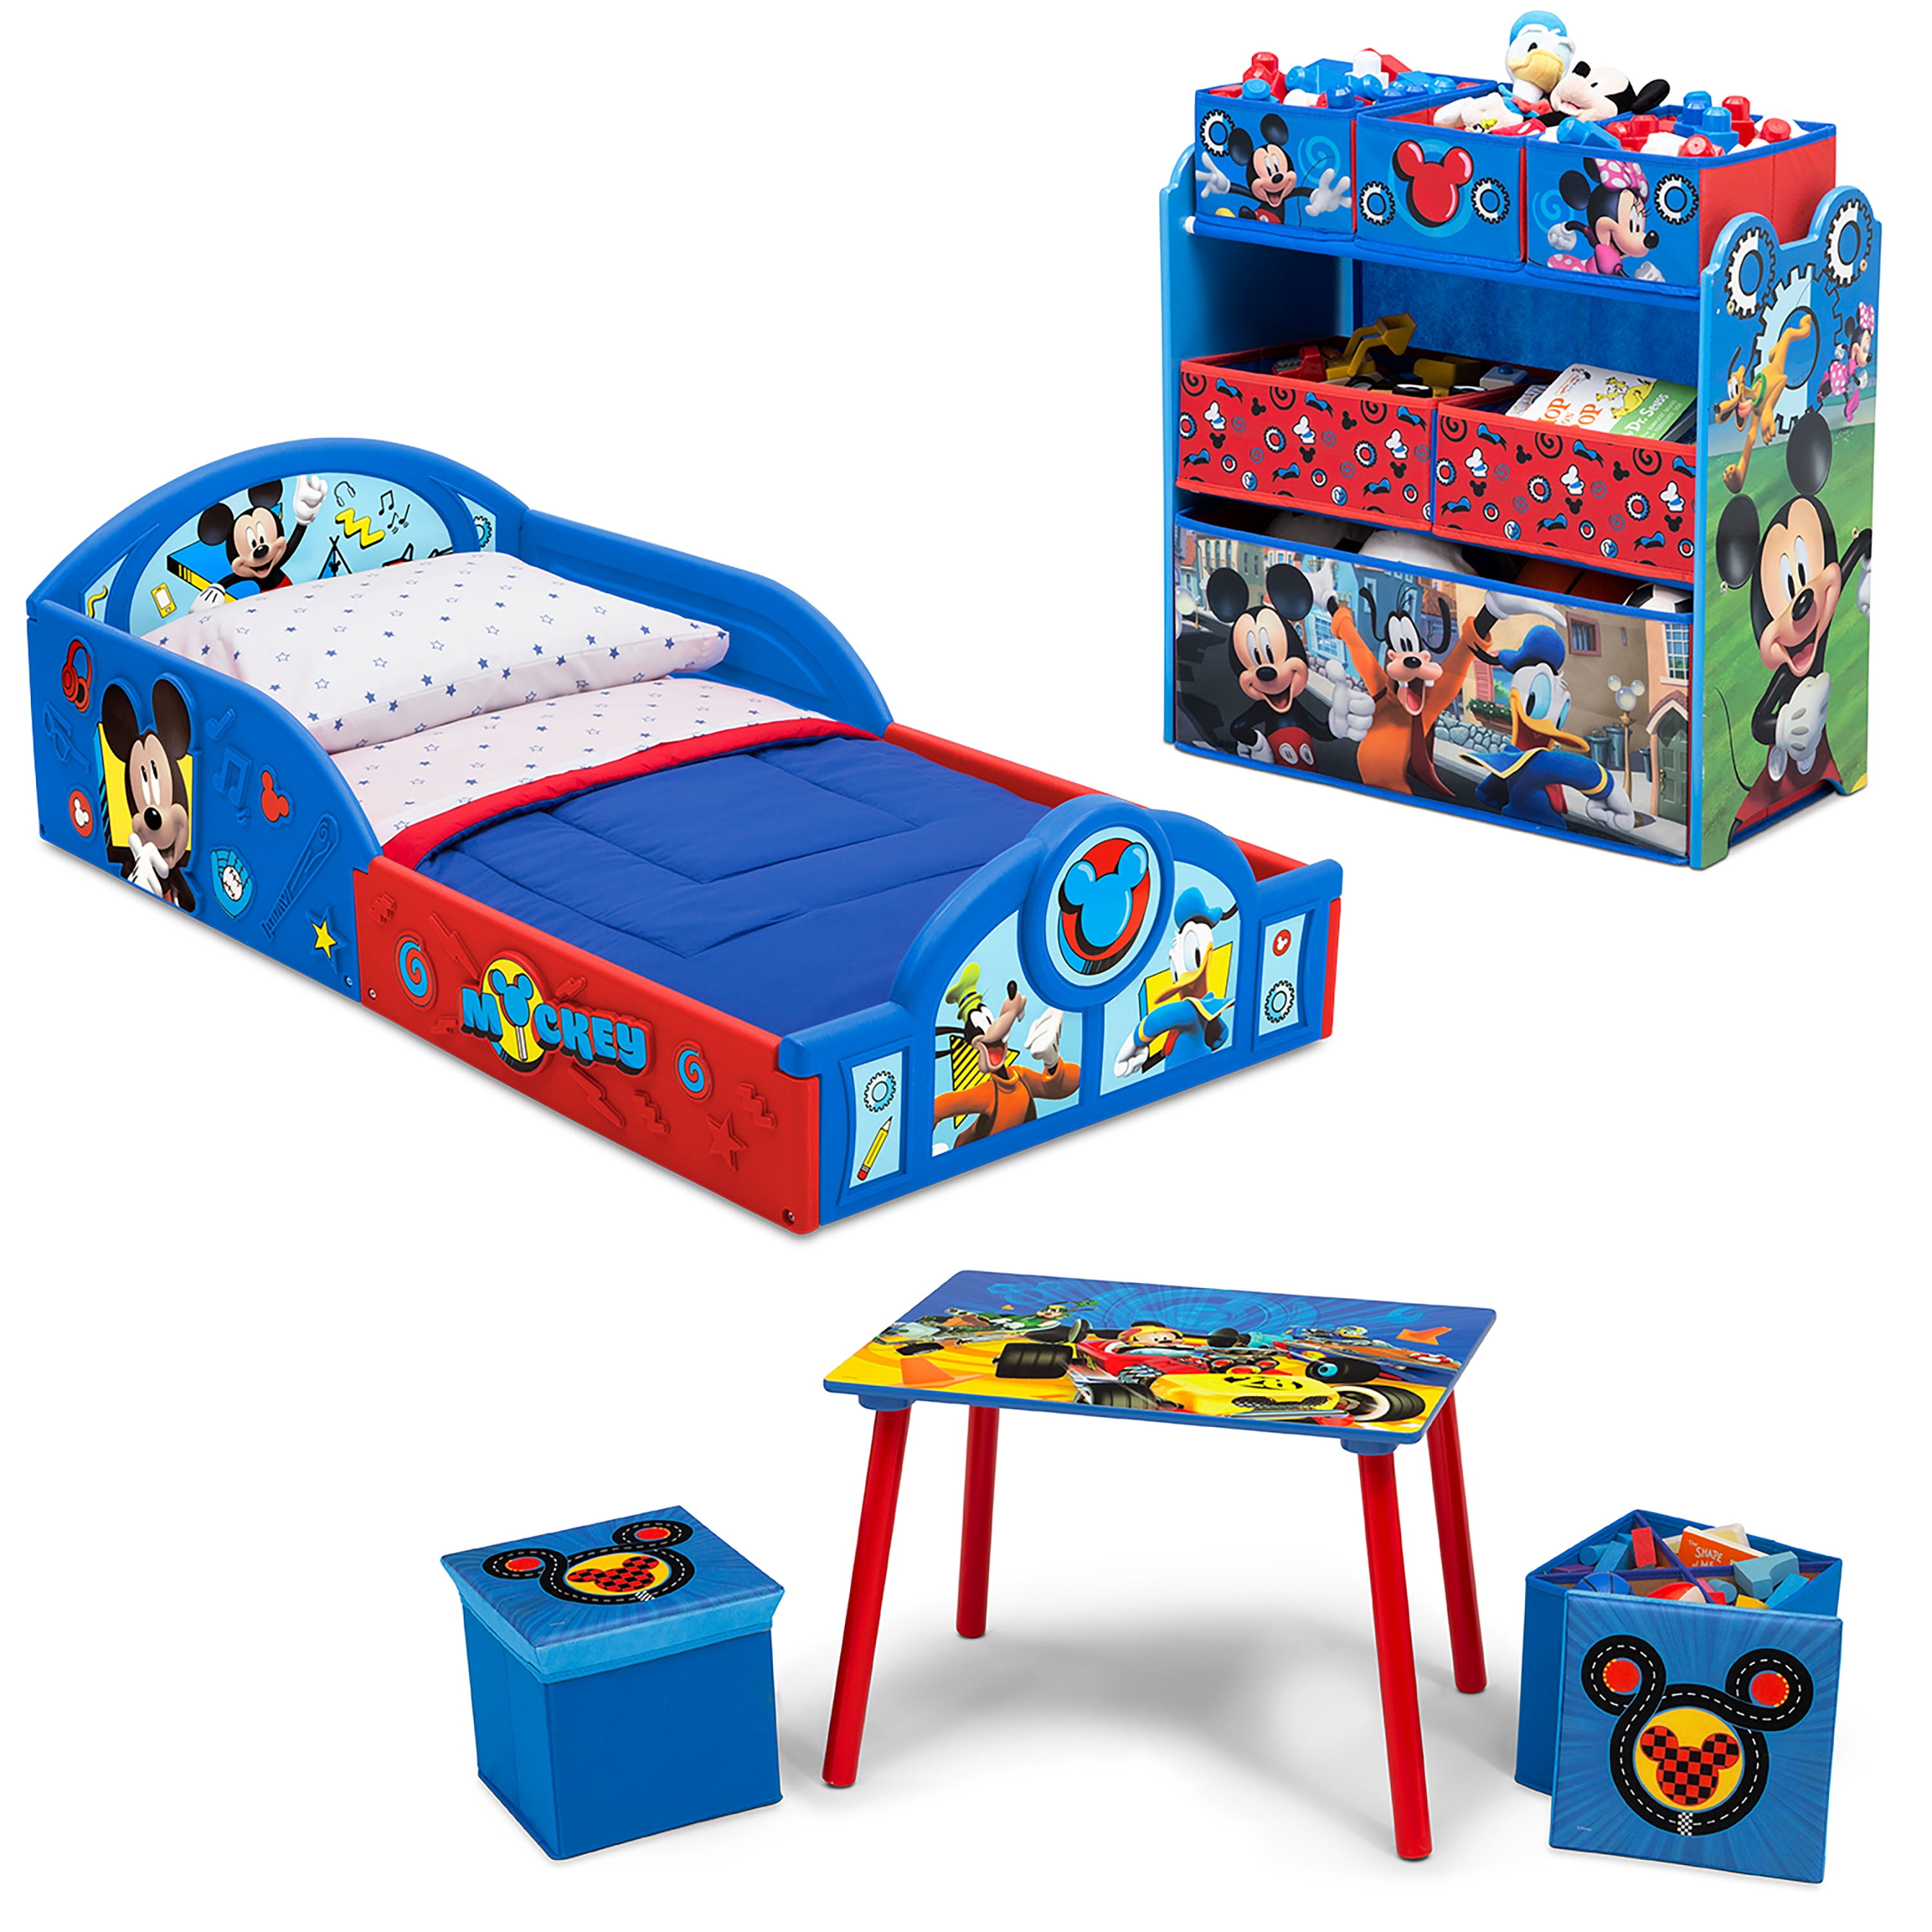 Disney Mickey Mouse 5 Piece Toddler Bedroom Set By Delta Children